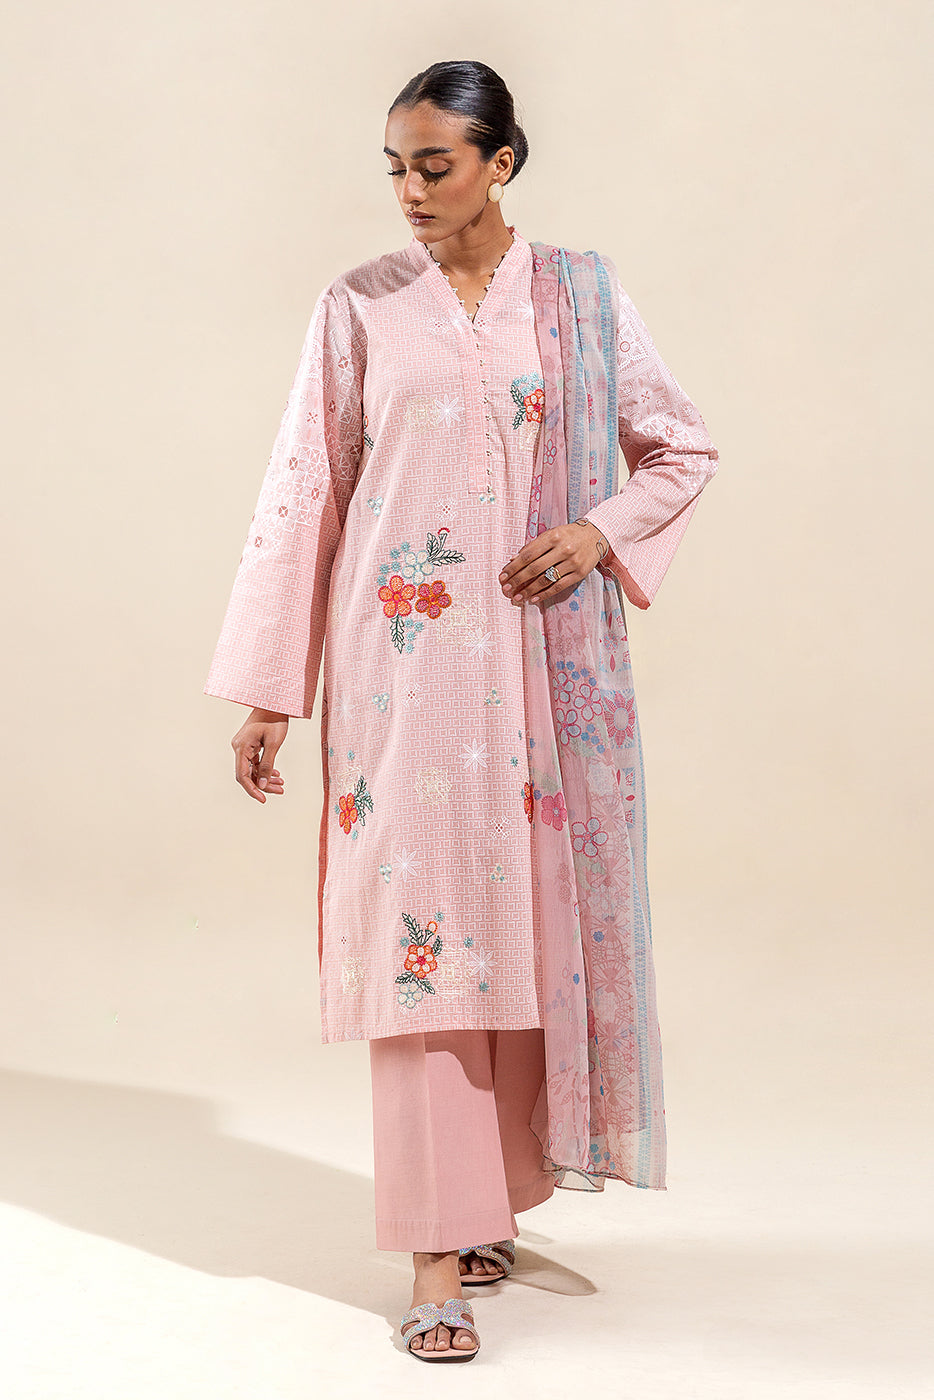 3 PIECE EMBROIDERED LAWN SUIT-ORNATE BLUSH (UNSTITCHED)